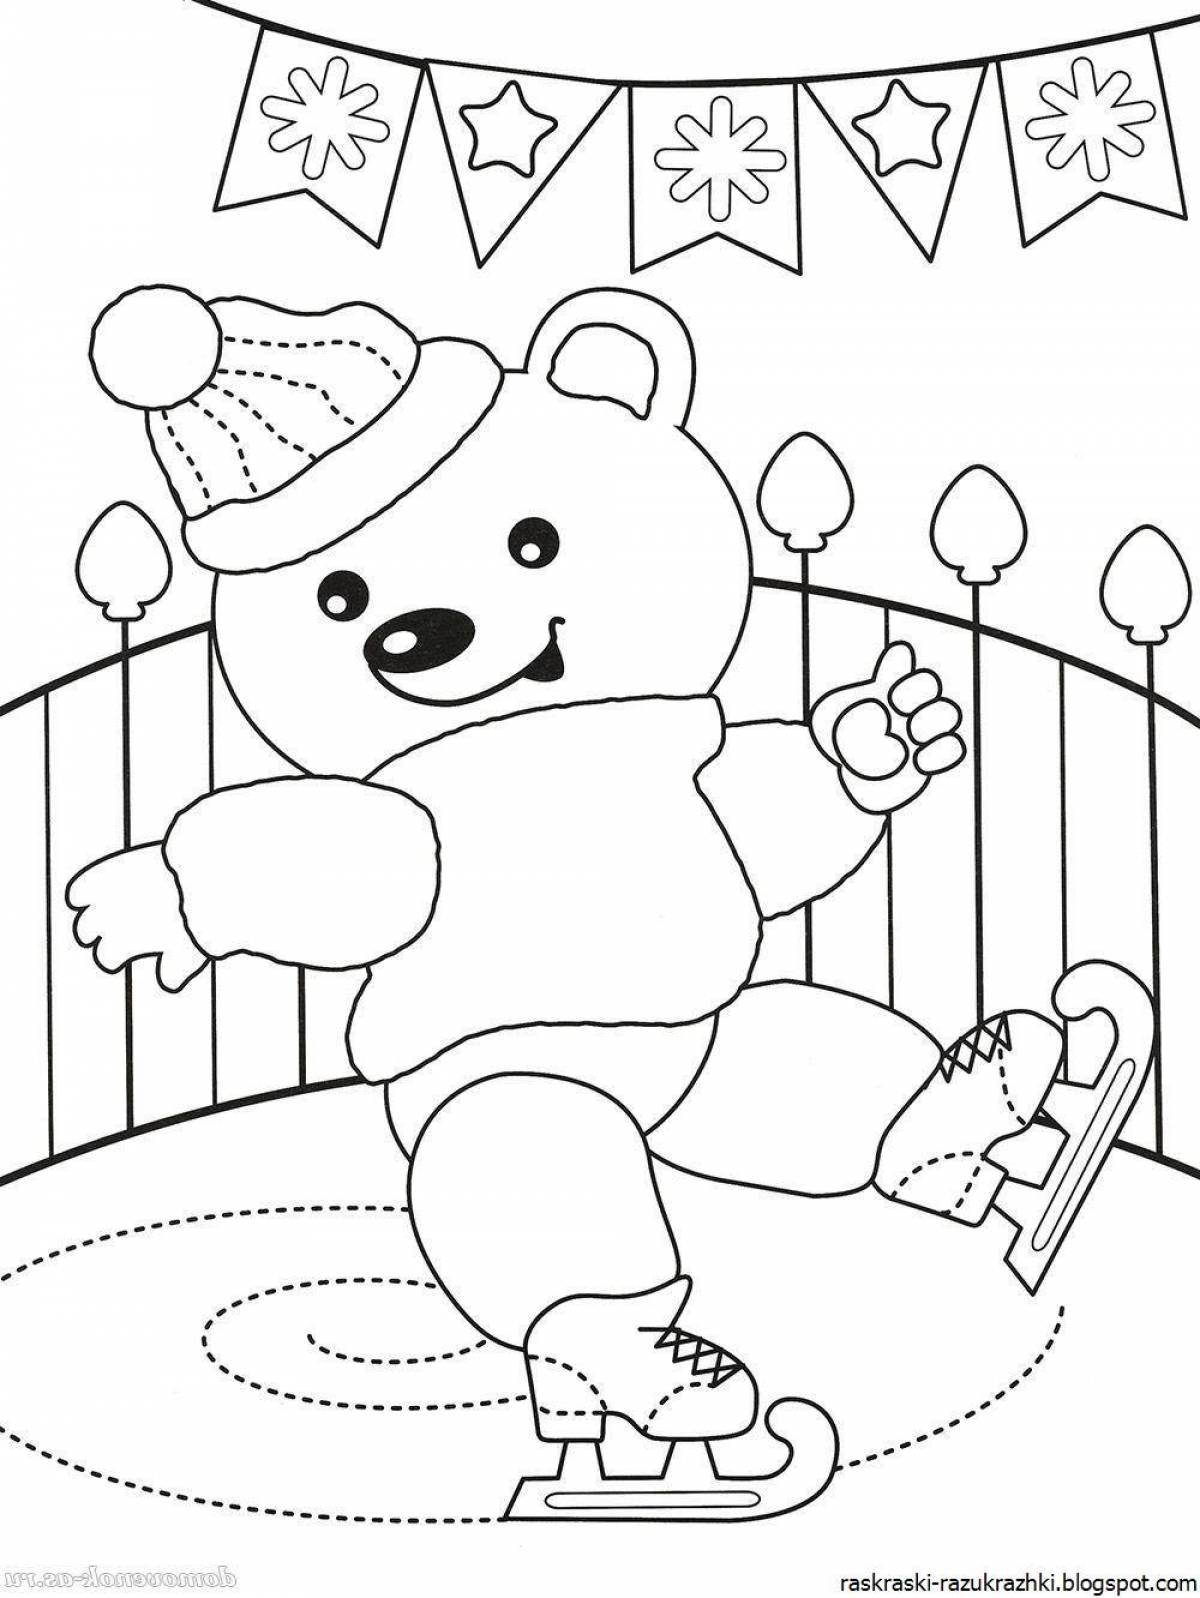 Wonderful winter coloring book for kids 6-7 years old